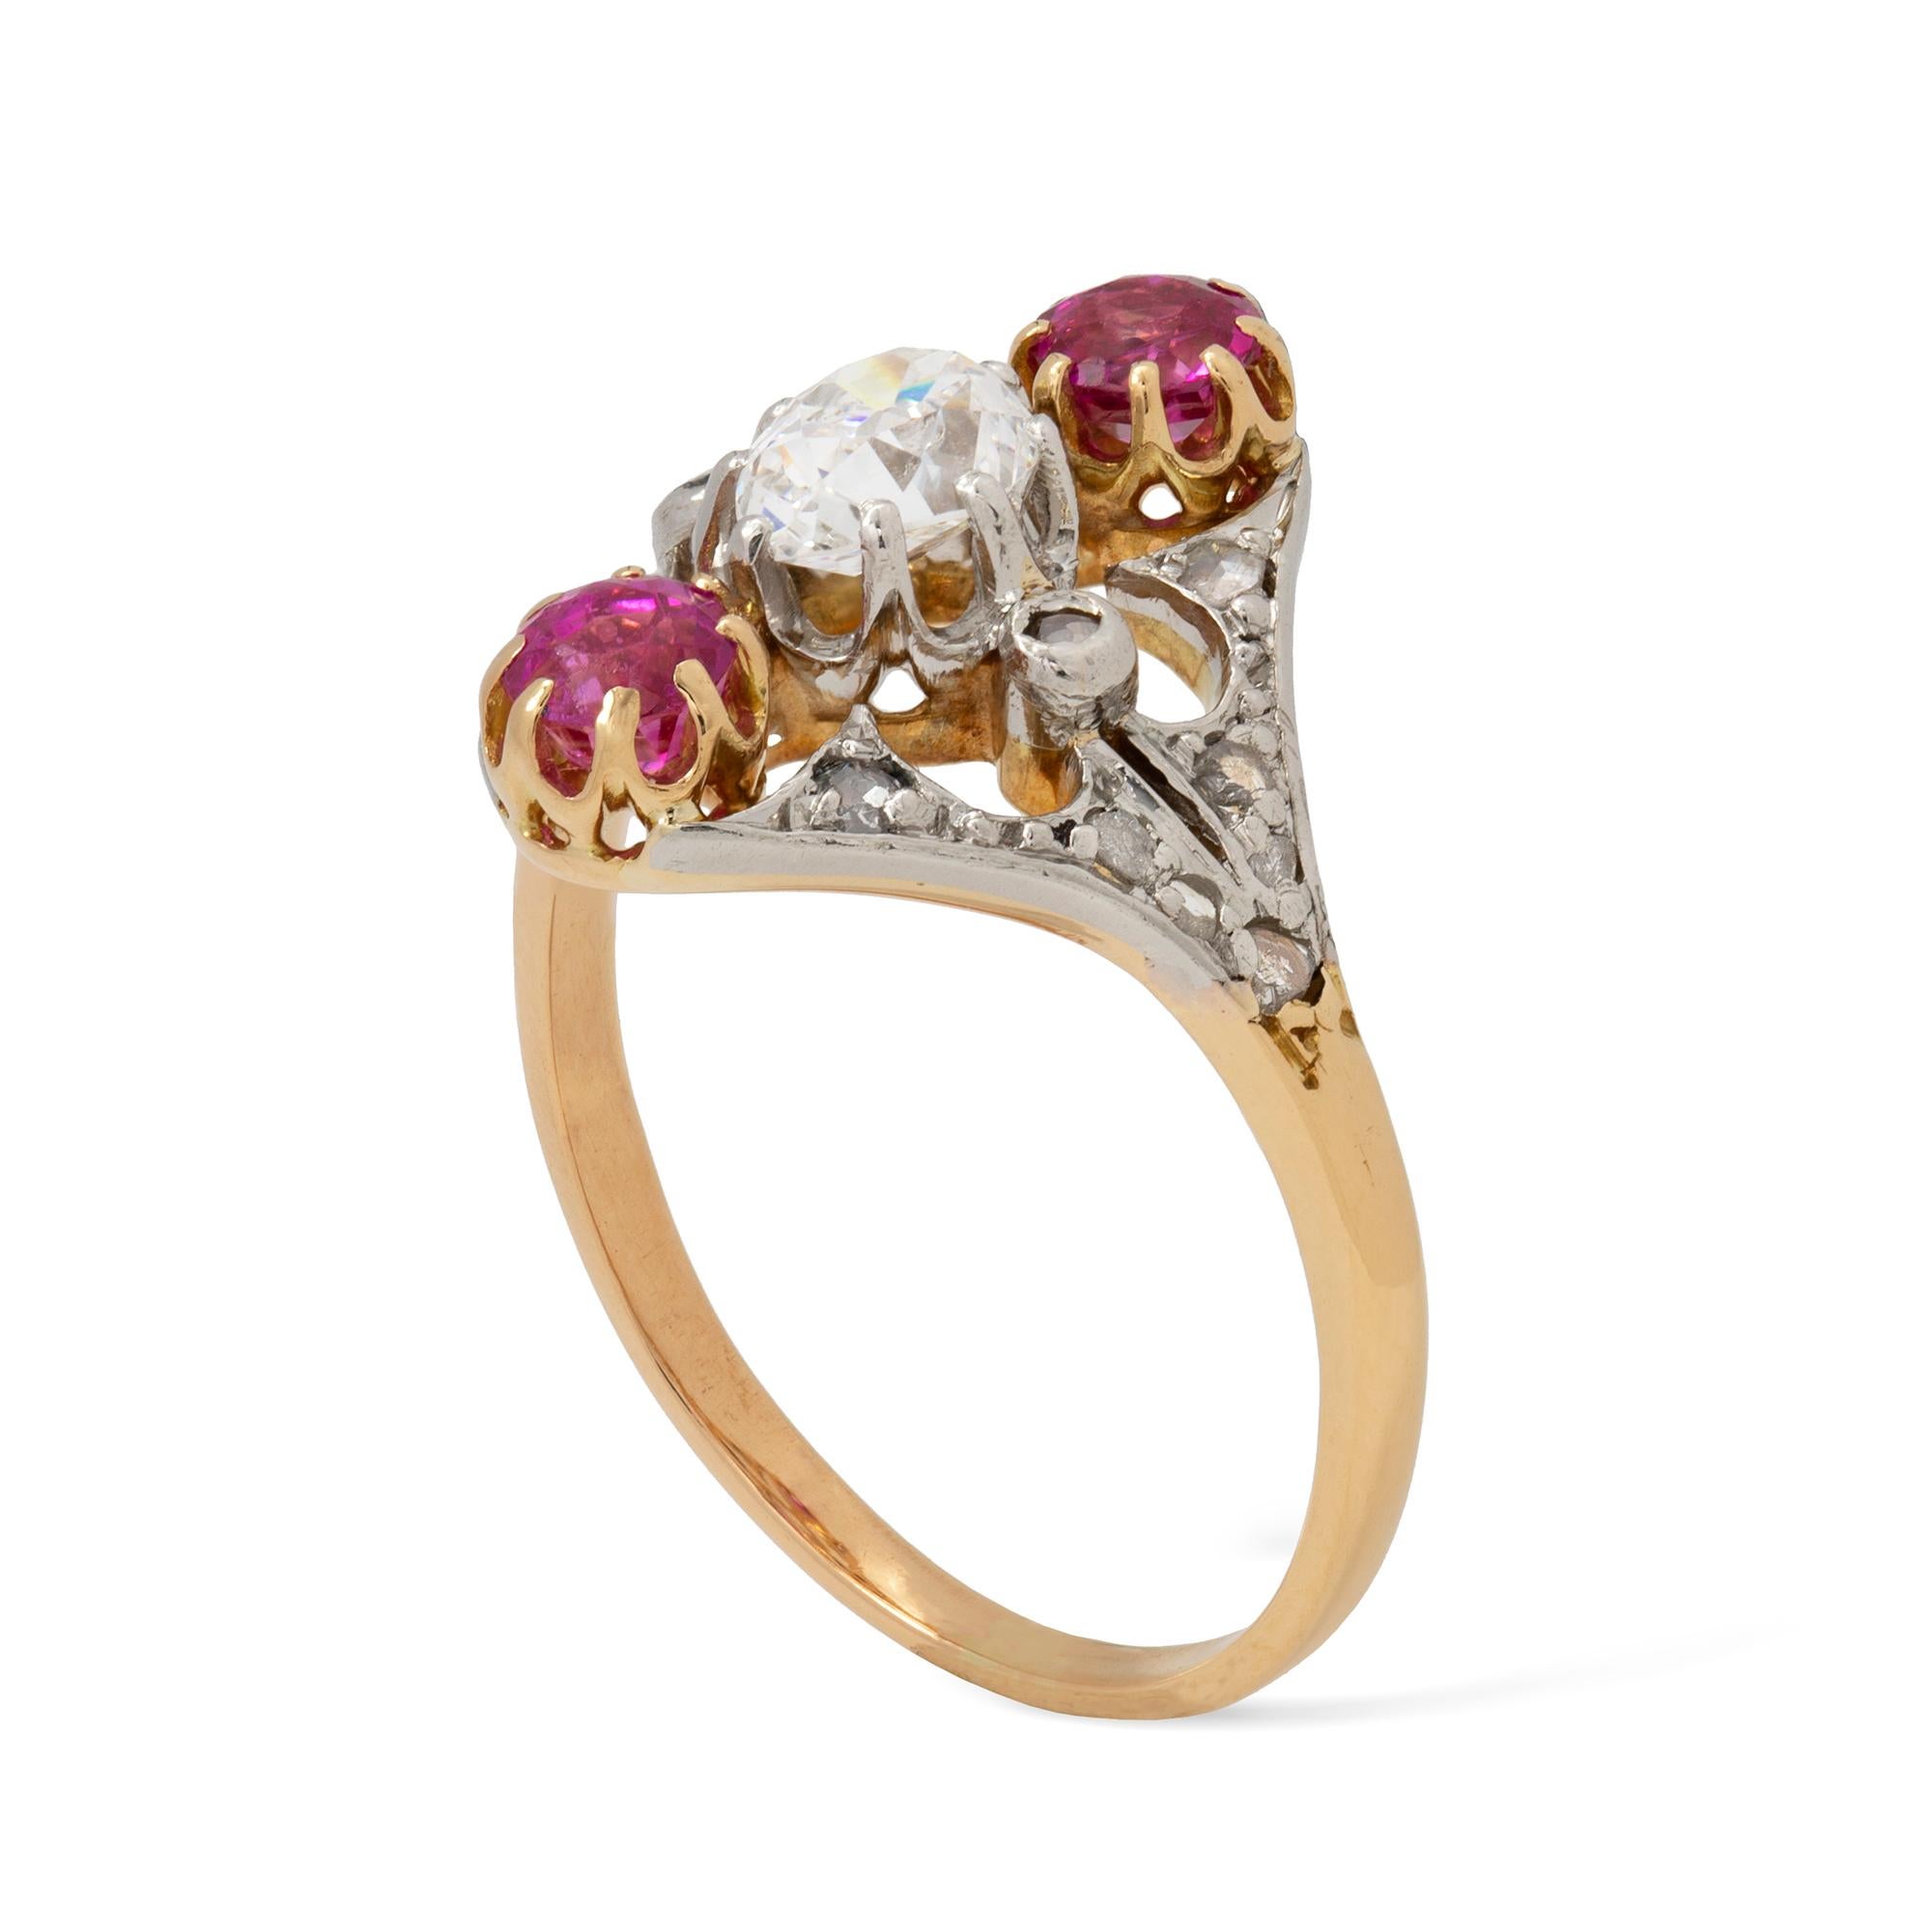 A three stone diamond and pink sapphire ring, the old pear-shaped diamond estimated to weigh 0.4 carats, vertically-set between two round faceted pink sapphires, estimated to weigh 0.4 carats in total, to rose-cut diamond set split shoulders, all